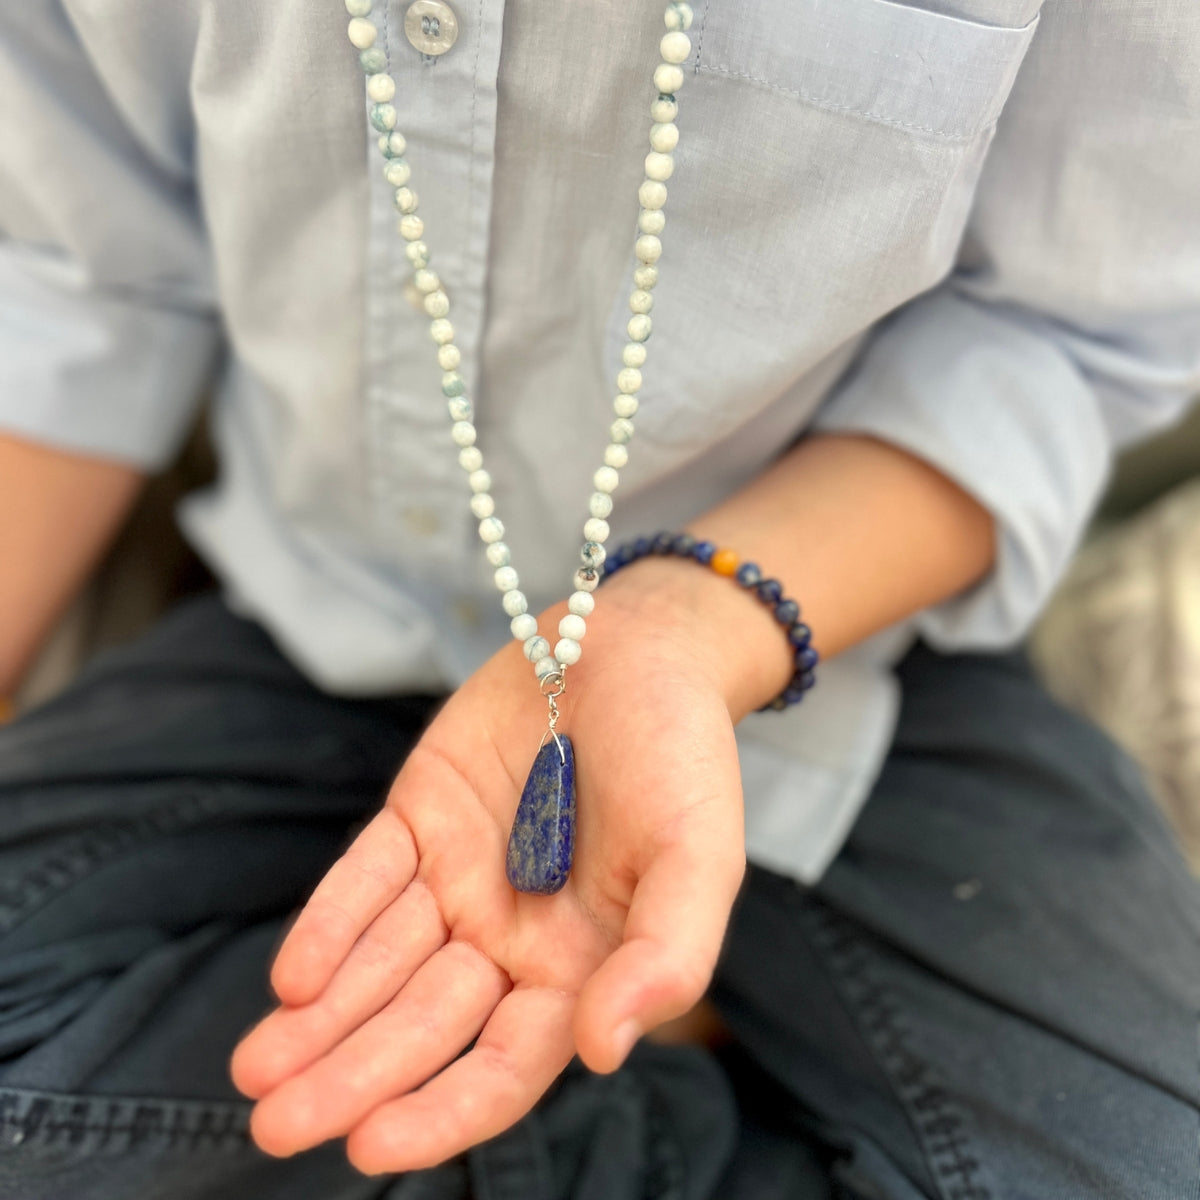 " Success is personal, so stop comparing your apples to their oranges" - Yohancé Salimu. This Truthful and Wise Necklace with Light Blue Amazonite and Lapis supports change that comes from within.